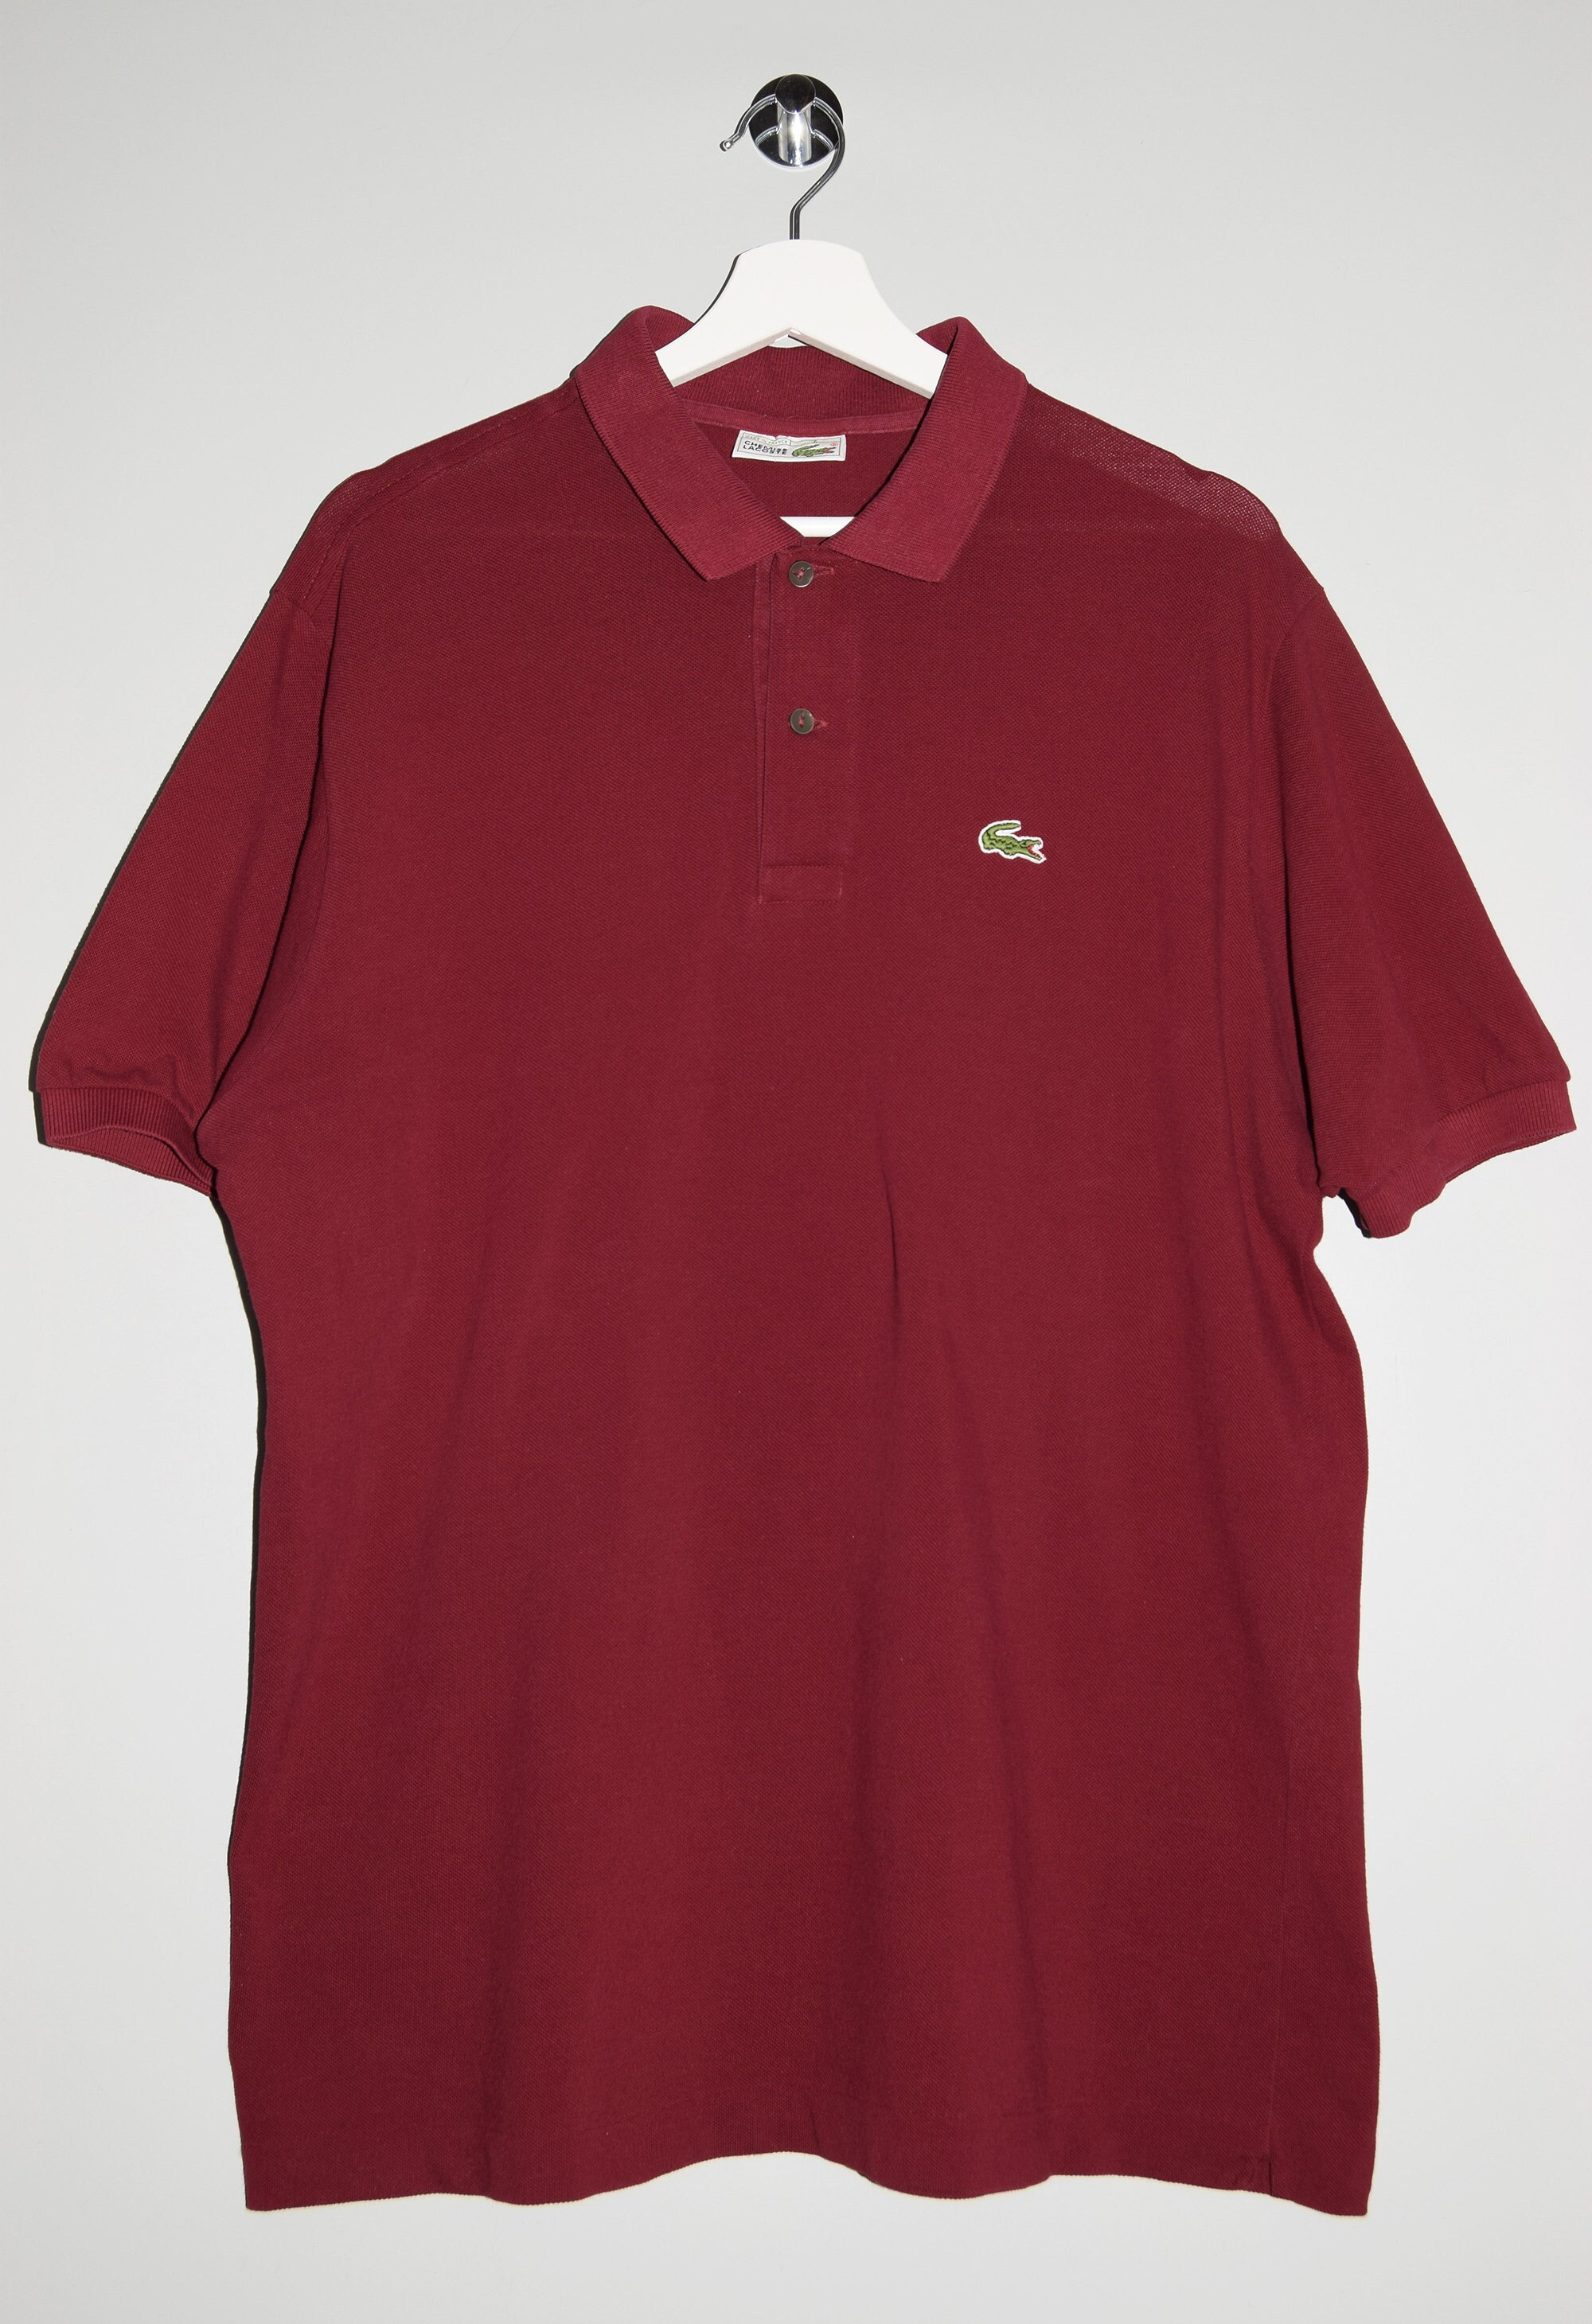 Vintage 80's Lacoste Chemise Made in France Polo Shirt - Etsy